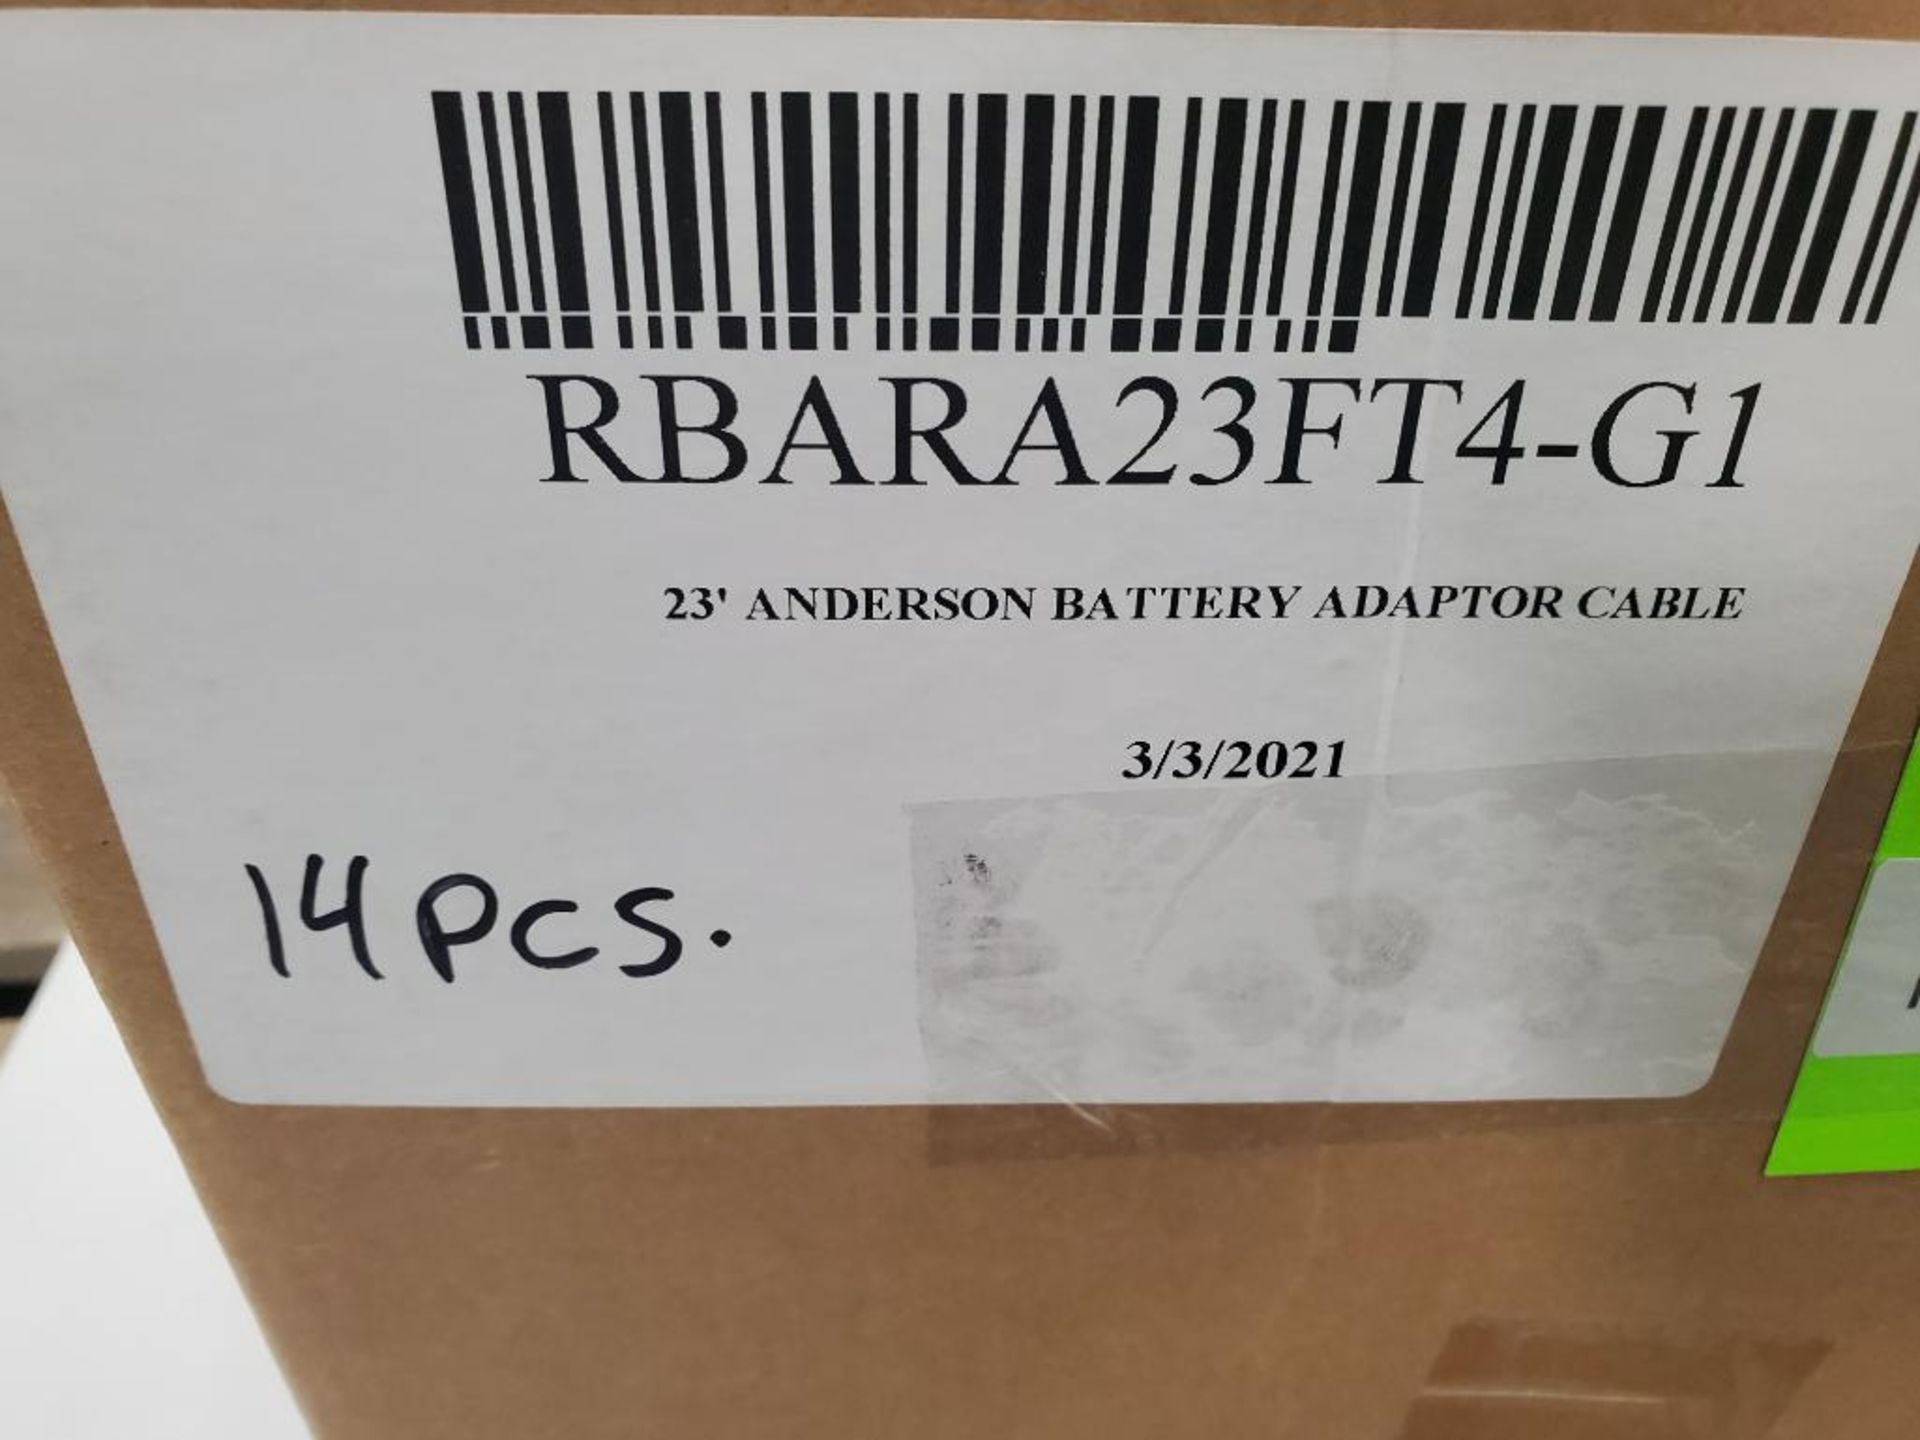 Qty 14 - Anderson 23ft battery adapter cable. RBARA23FT4-G1. 175A, 600V plug. New in box. - Image 2 of 7